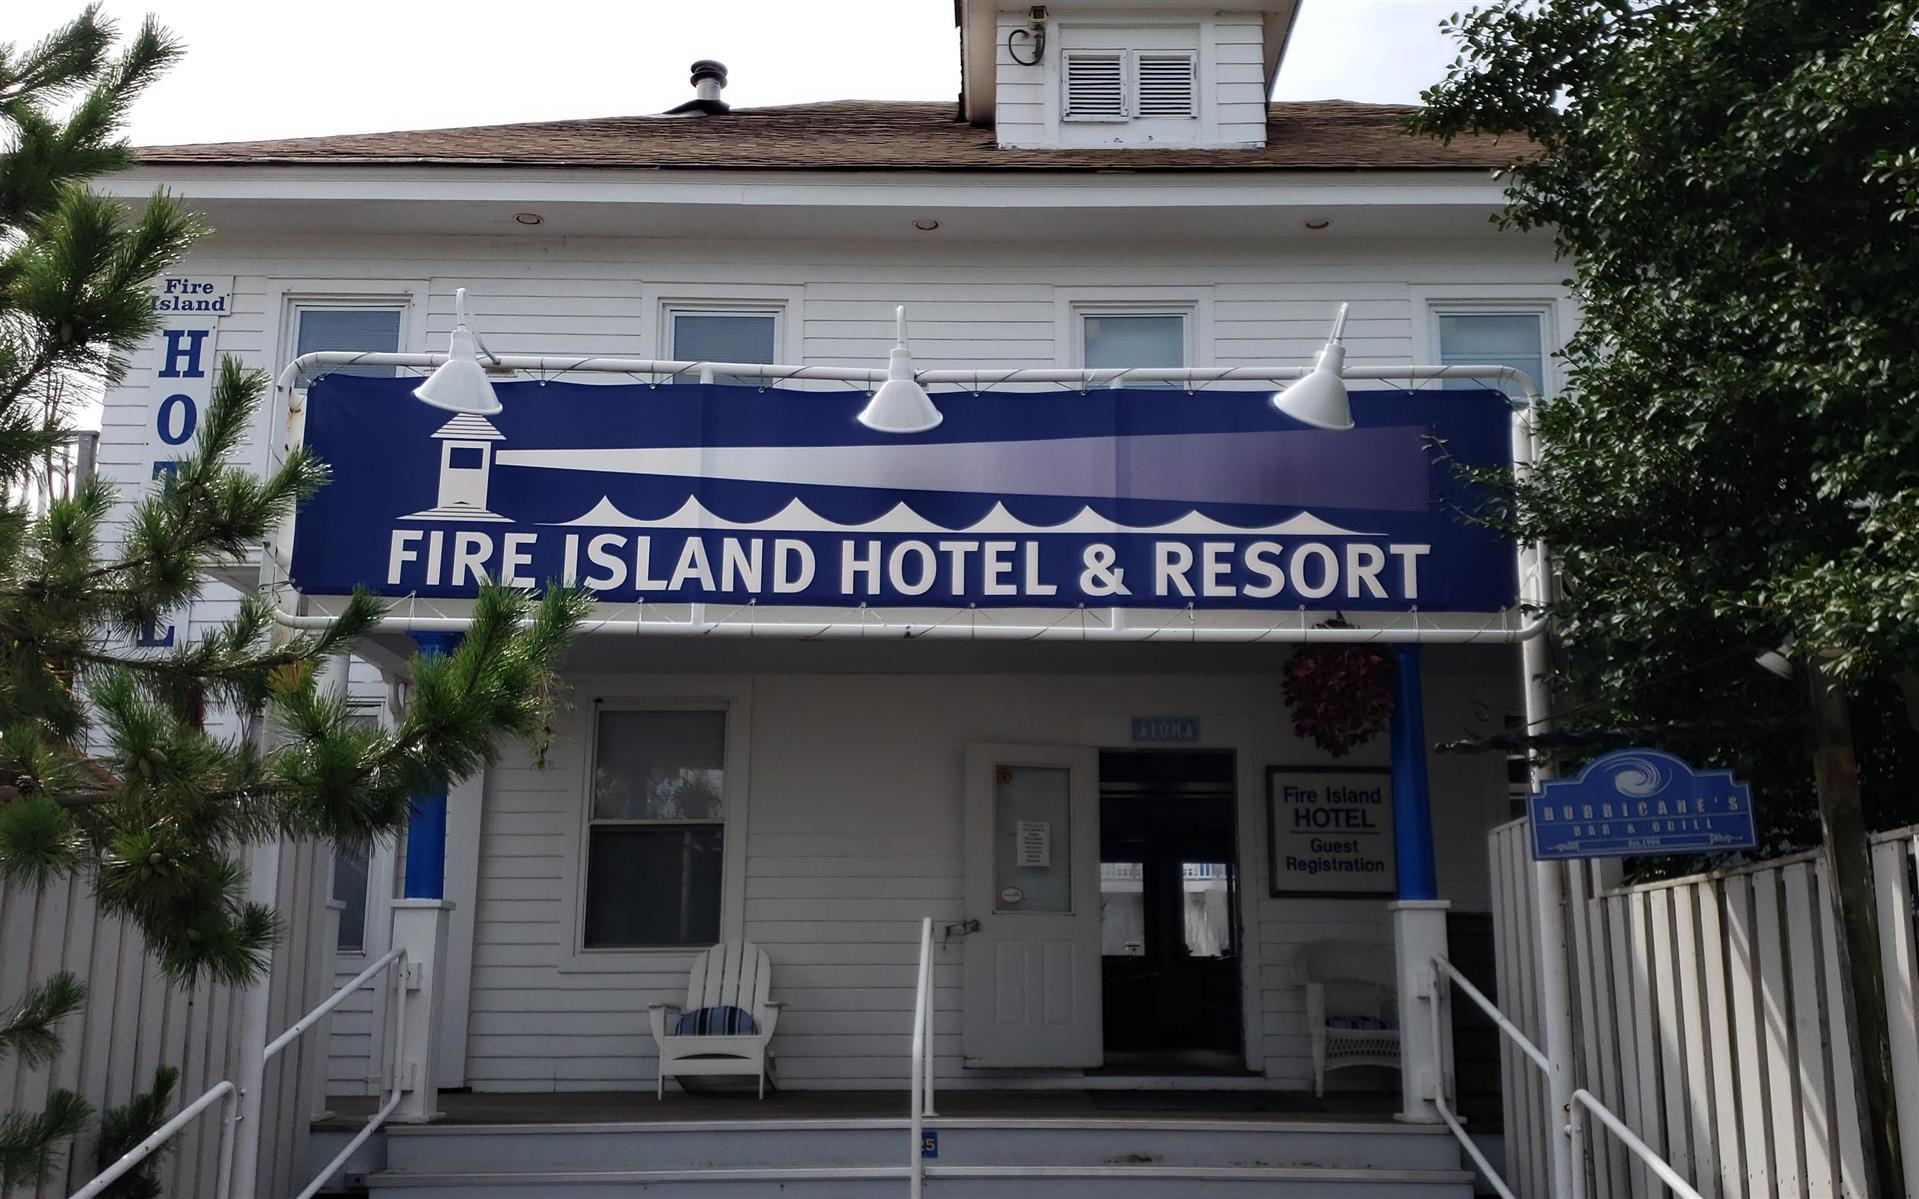 Fire Island Hotel and Resort in New York, NY